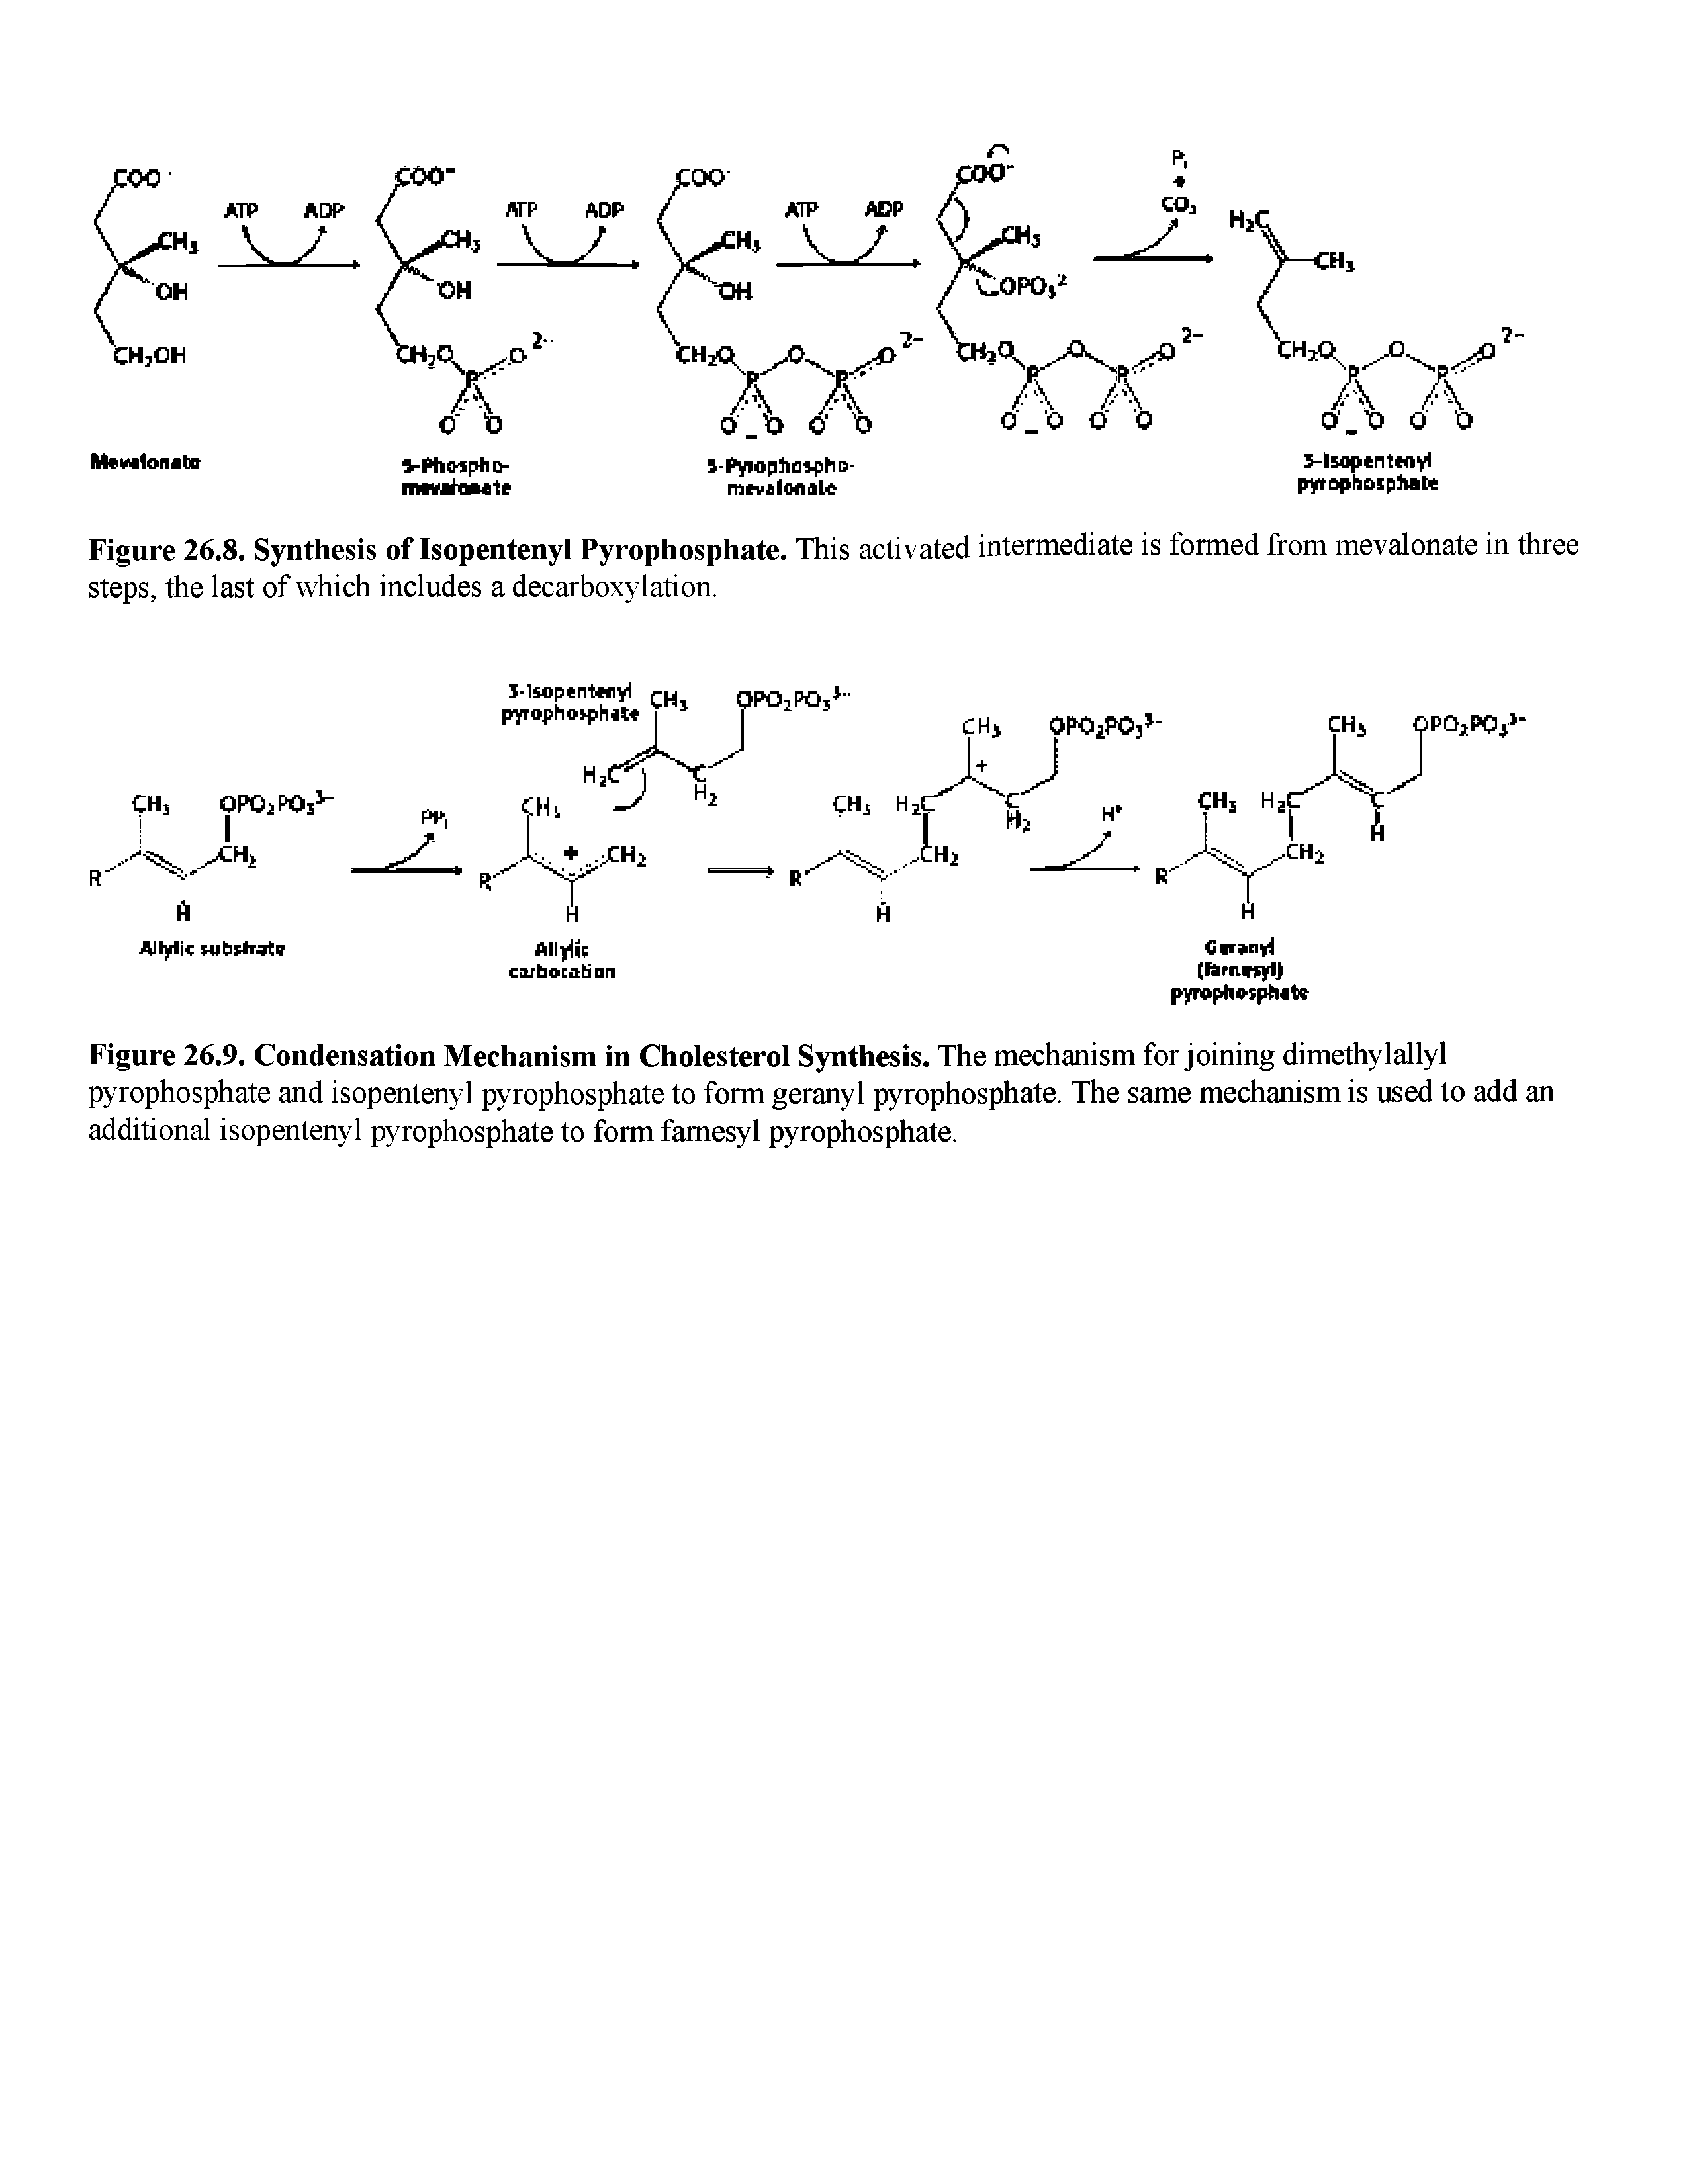 Figure 26.9. Condensation Mechanism in Cholesterol Synthesis. The mechanism for joining dimethylallyl pyrophosphate and isopentenyl pyrophosphate to form geranyl pyrophosphate. The same mechanism is used to add an additional isopentenyl pyrophosphate to form famesyl pyrophosphate.